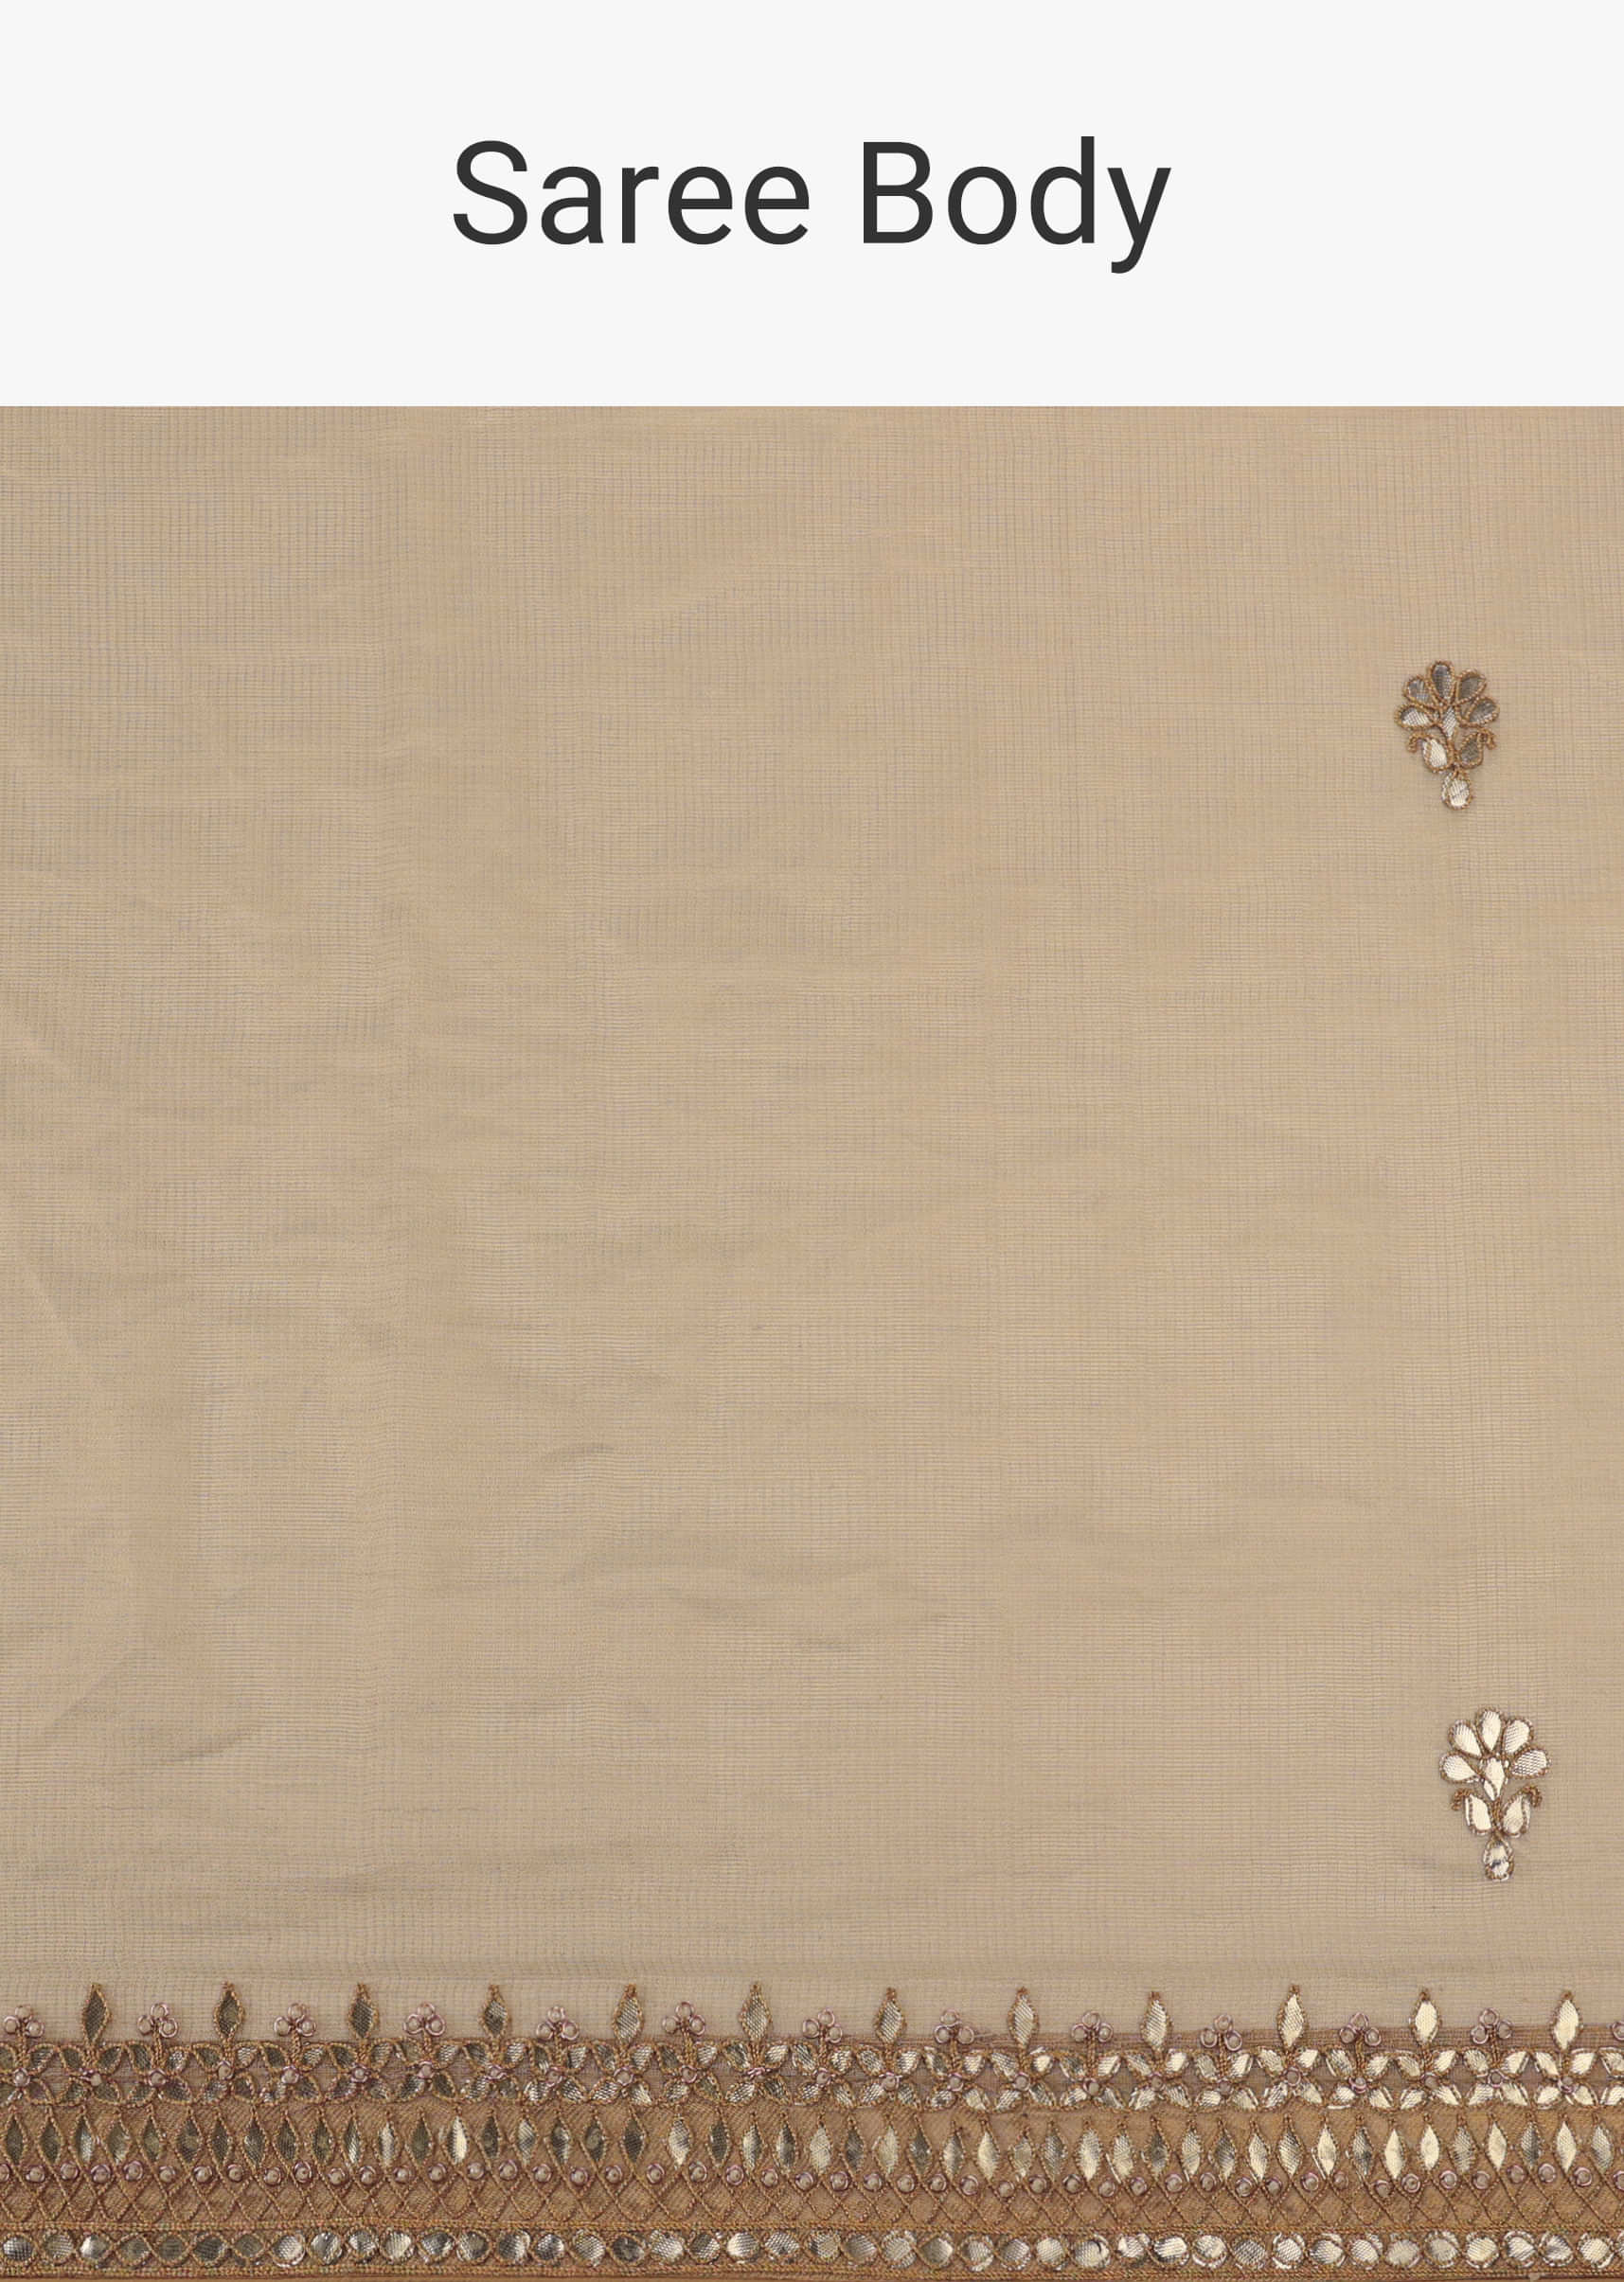 Beige Embroidered Banarasi Saree With Gota Patti And Beads In Tissue Organza